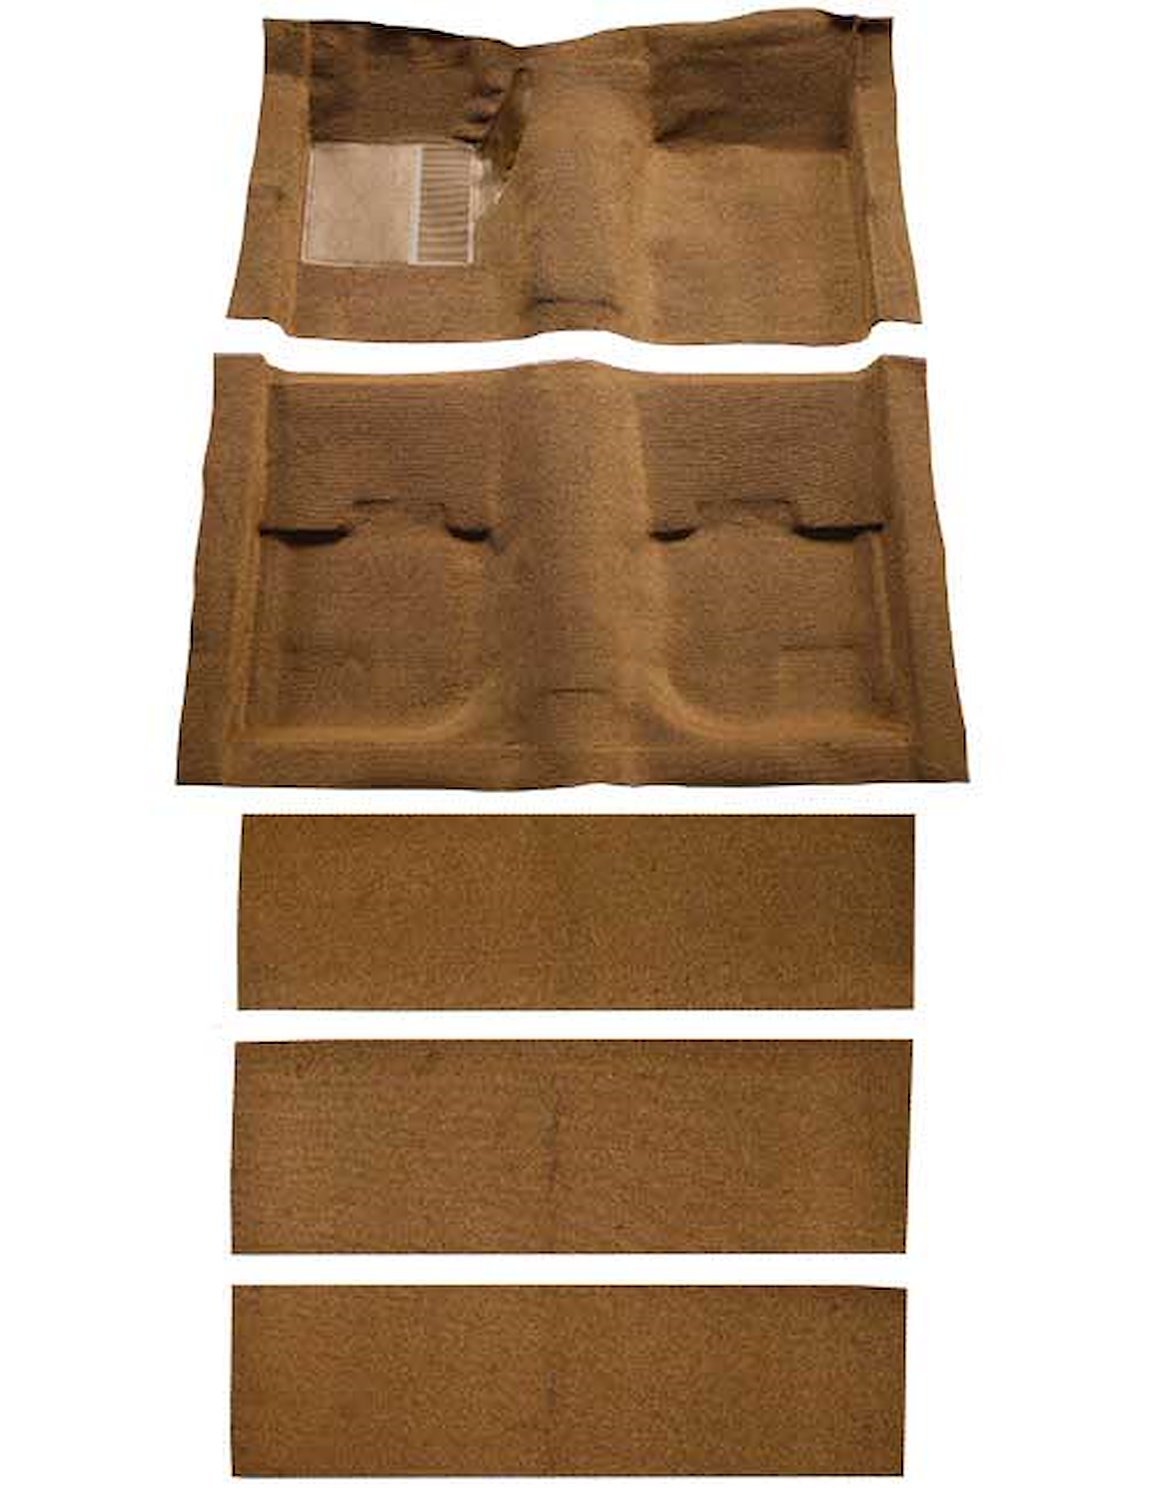 A4055A29 Nylon Loop Floor and Fold Down Seat Carpet Set 1969-70 Mustang Fastback; Ginger